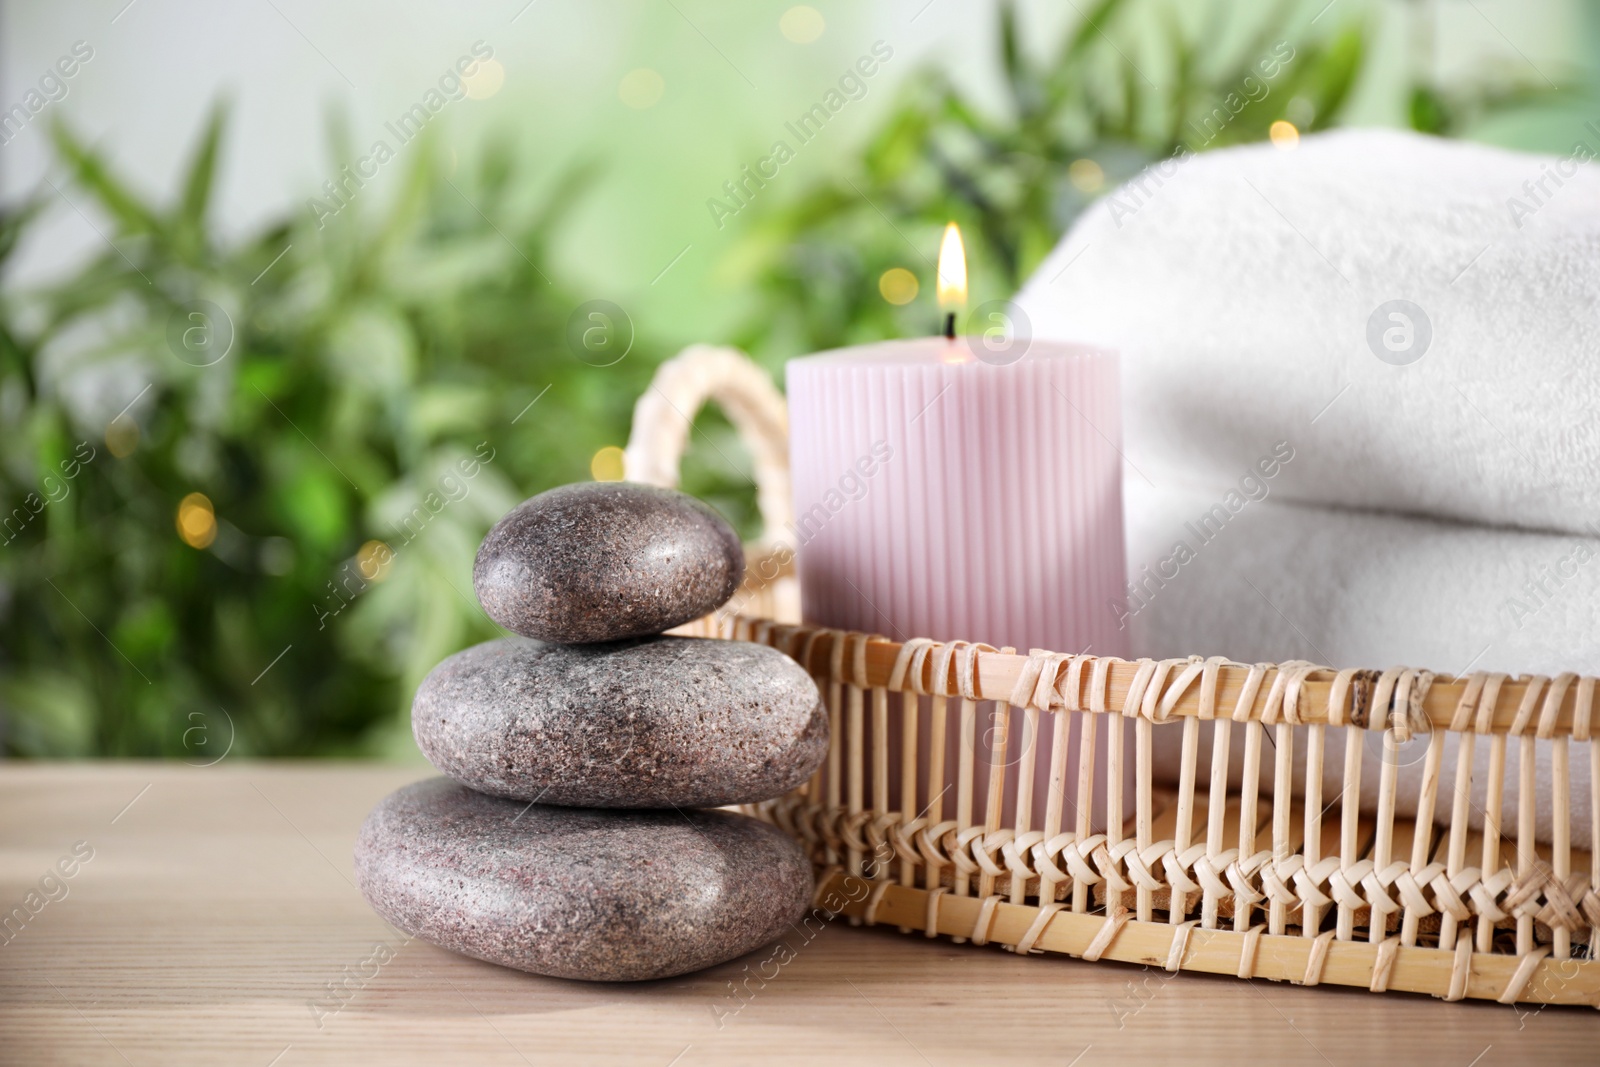 Photo of Spa stones and tray with towels and lit candle on wooden table, space for text